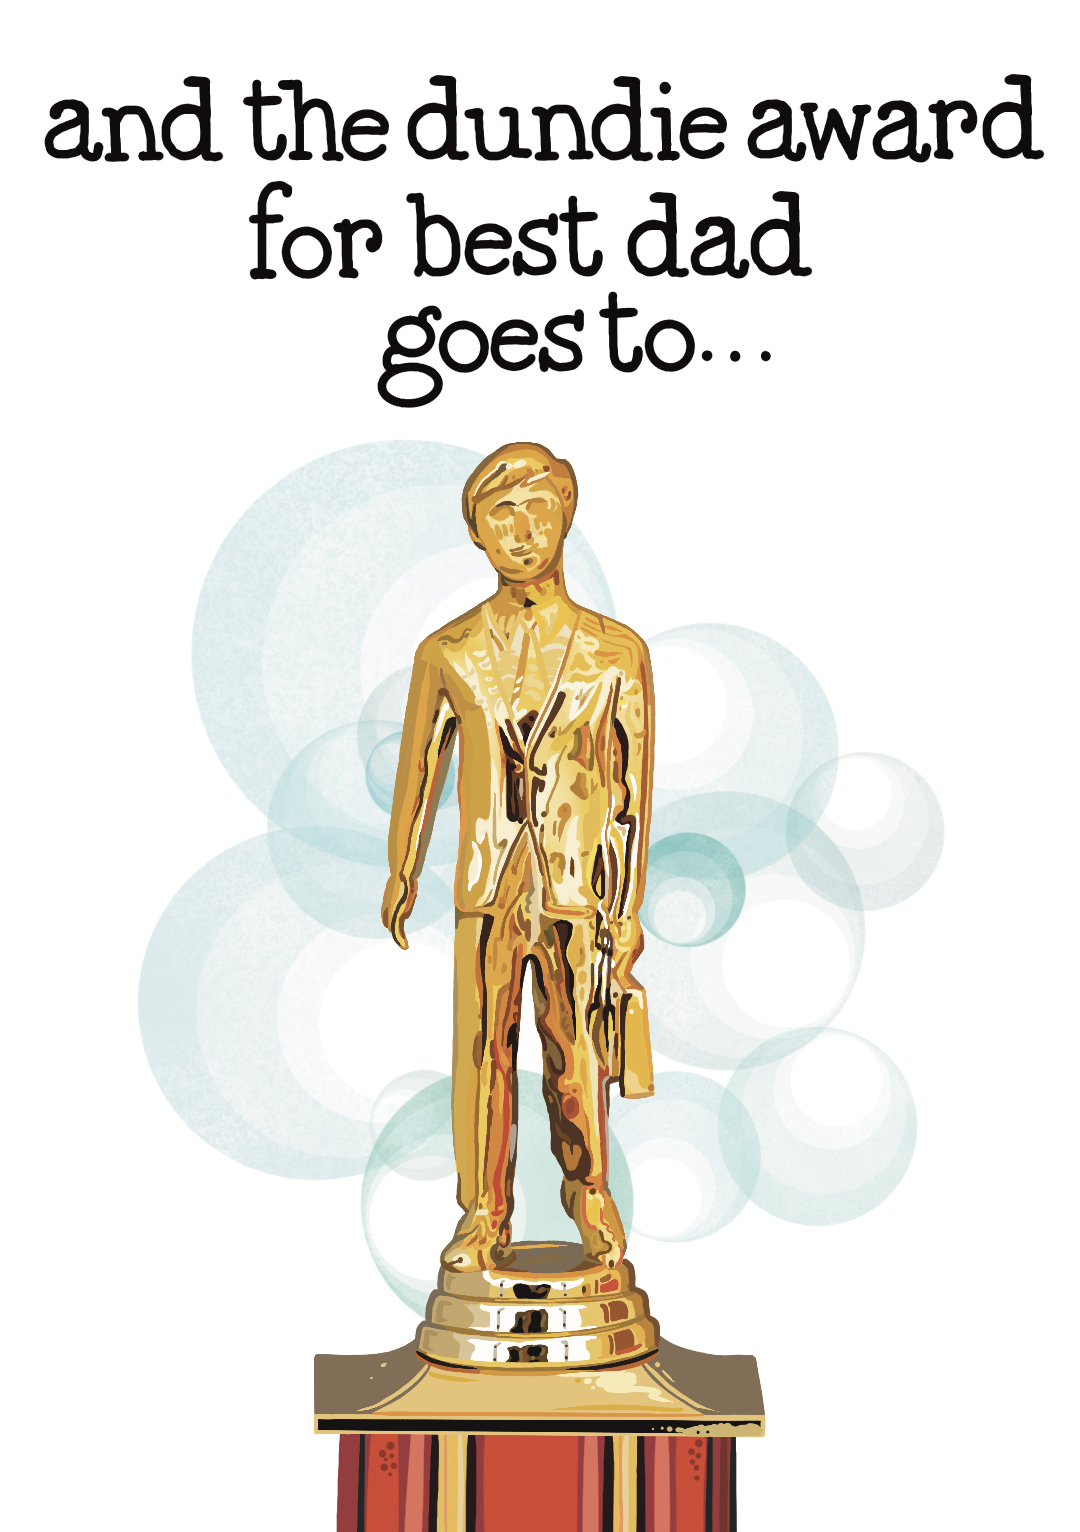 And The Dundie Award For Best Dad Goes To...